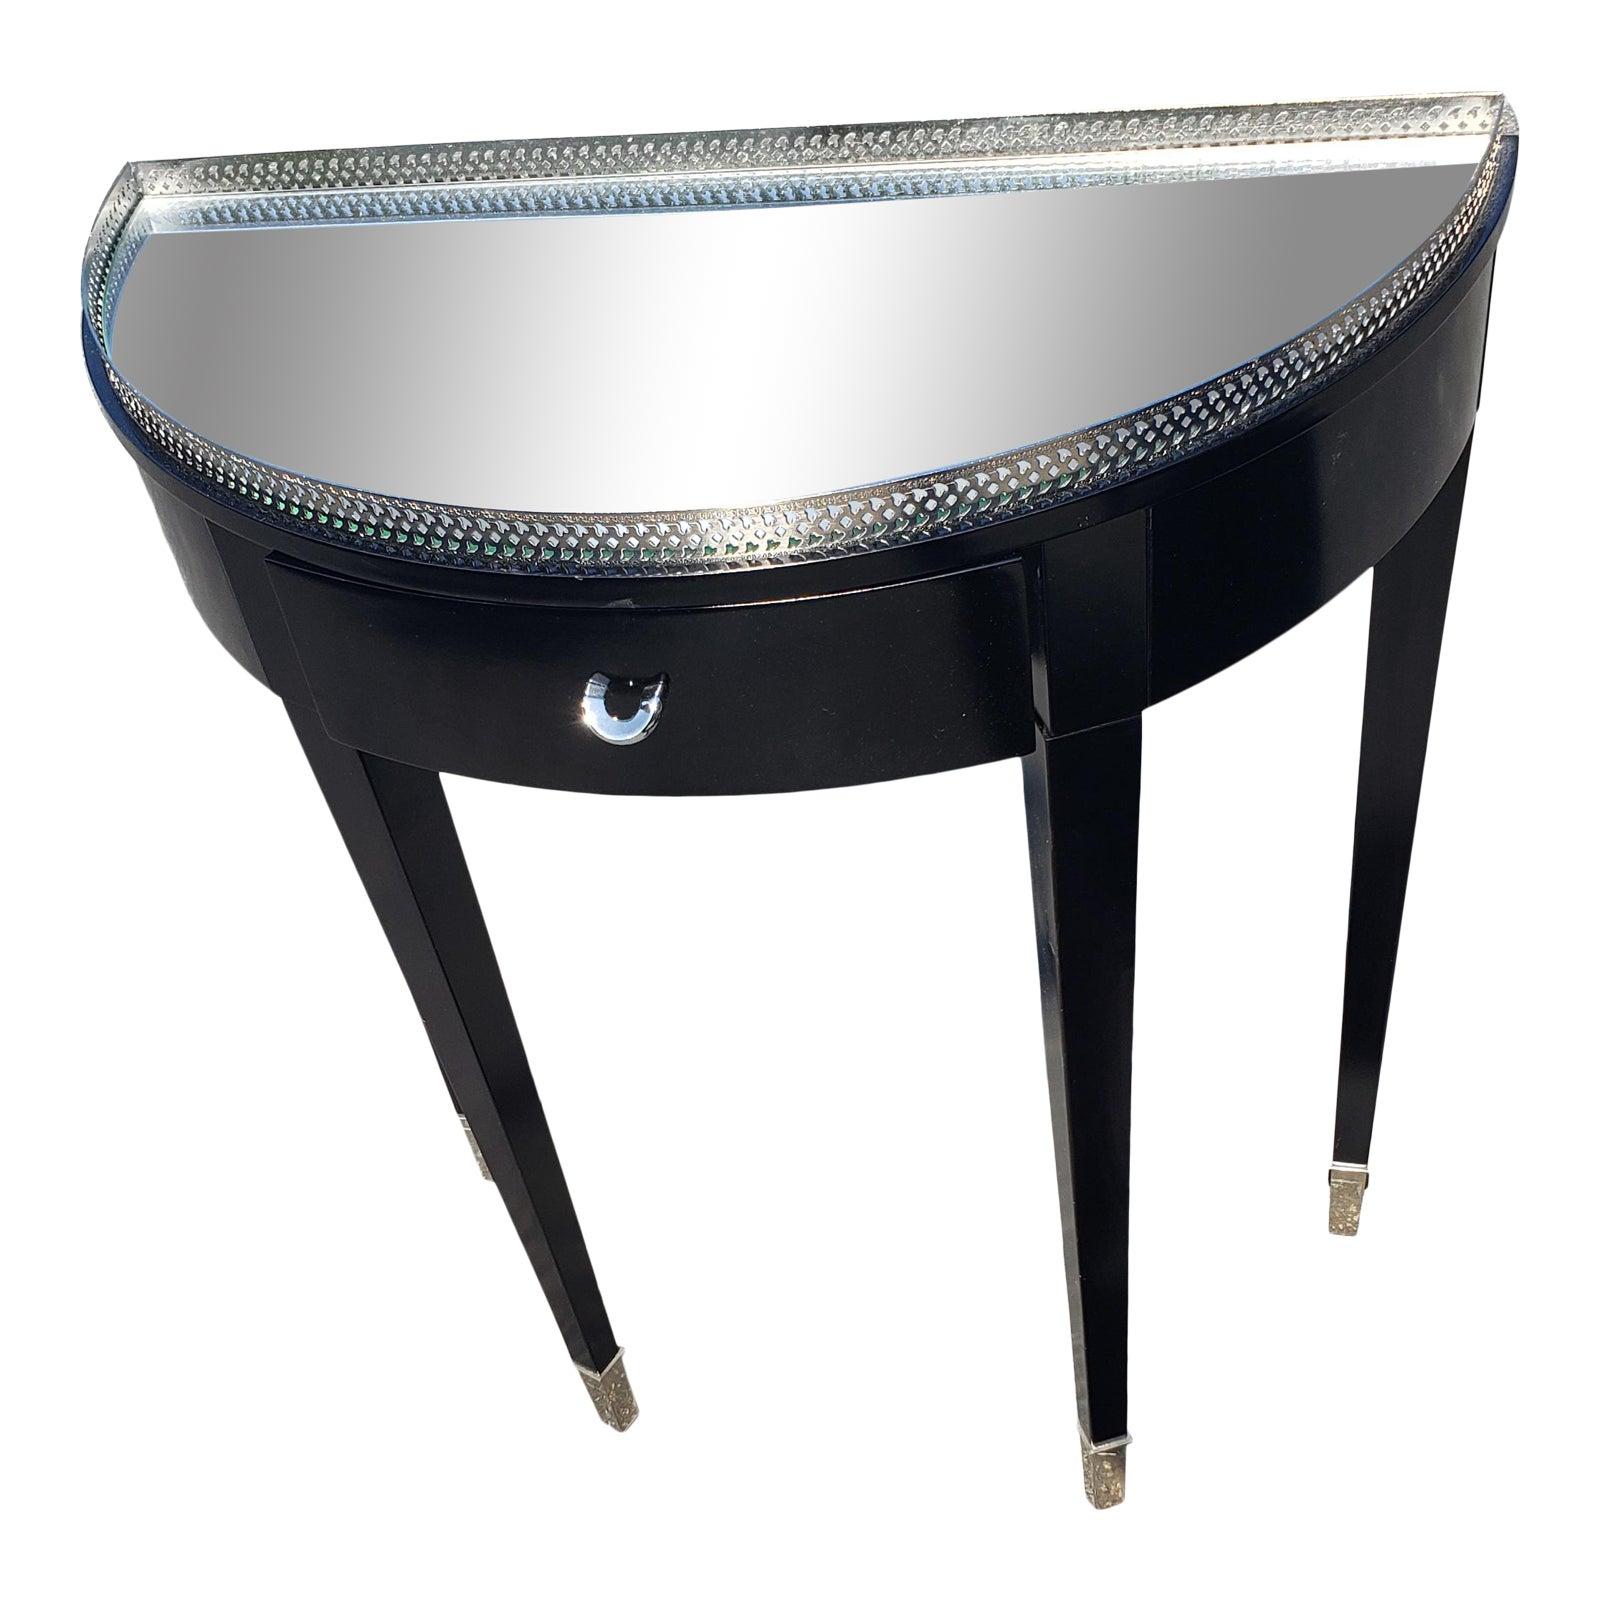 1990s Mirrored Contemporary Foyer Table